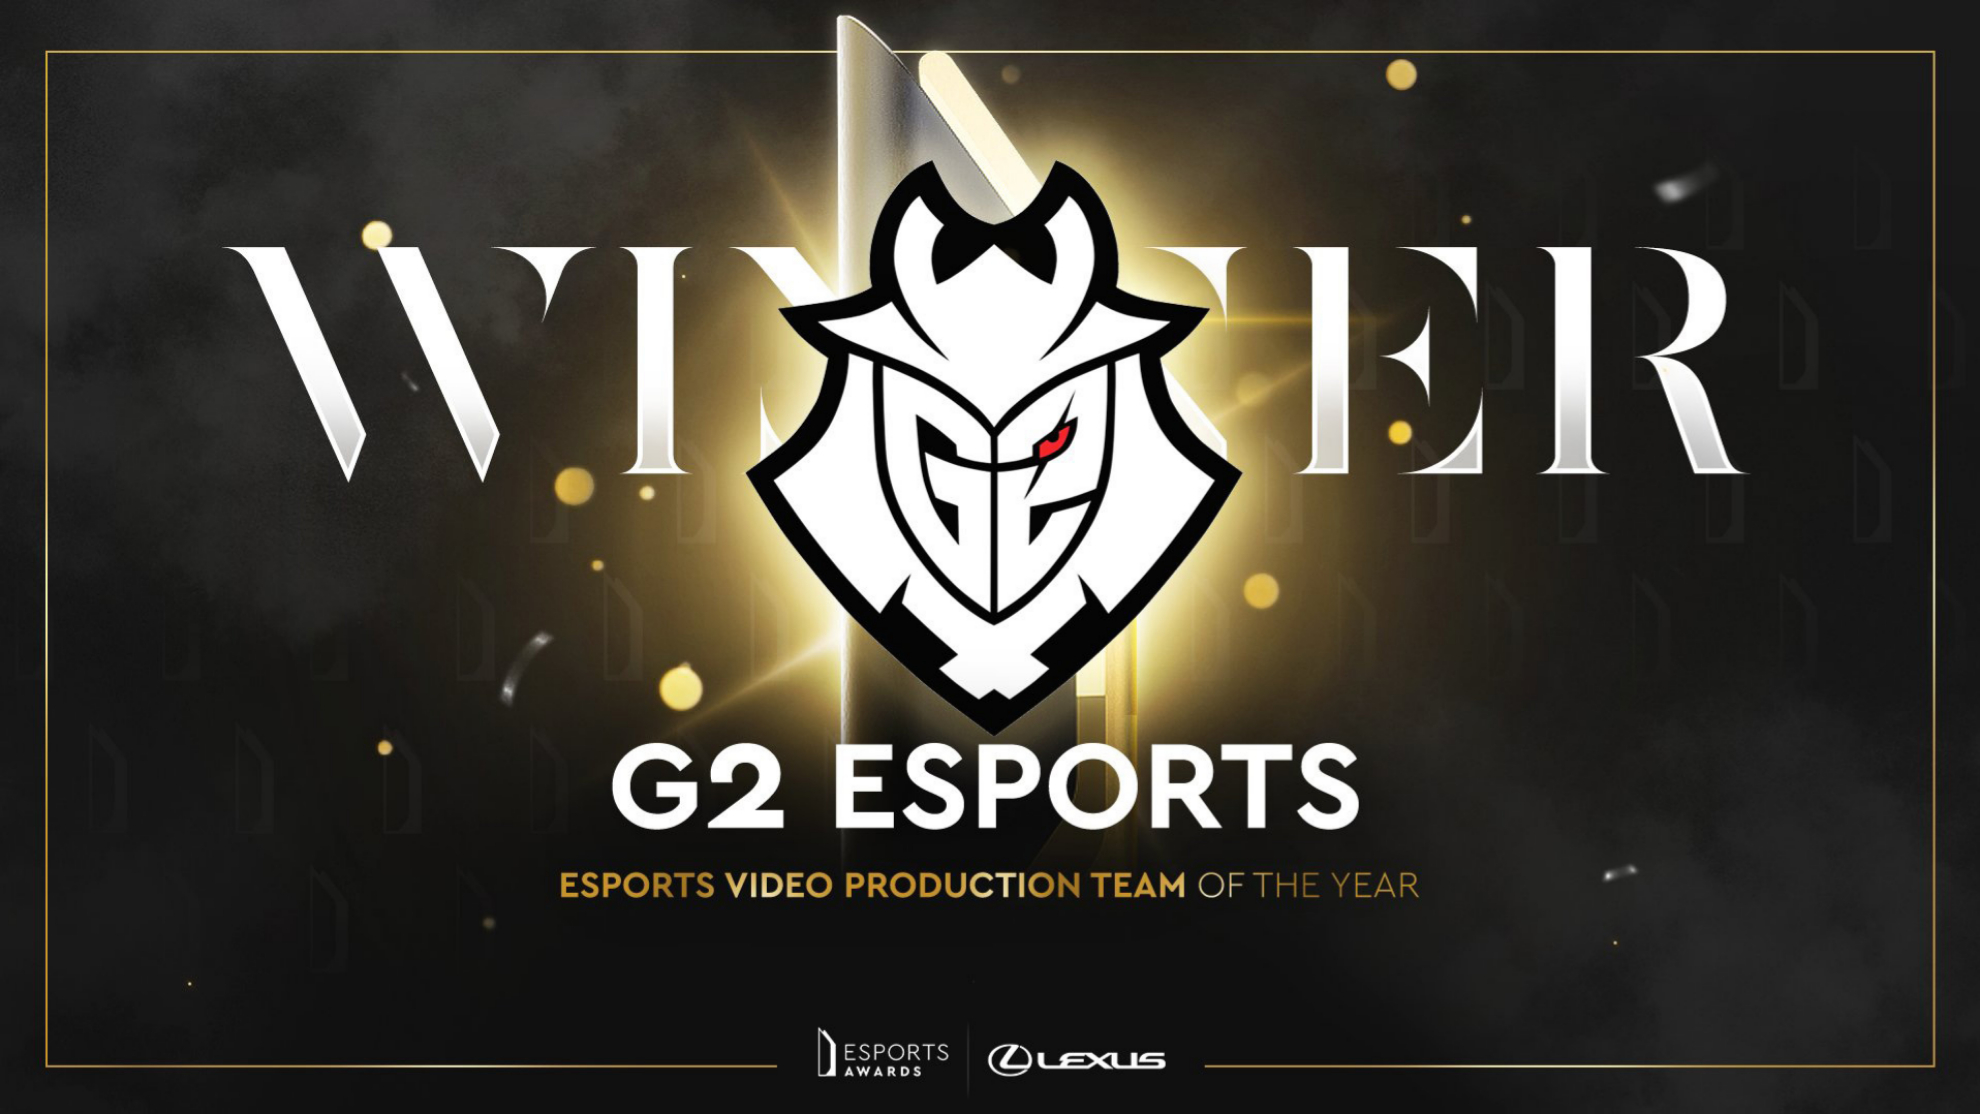 Esports Video Production Team of the Year